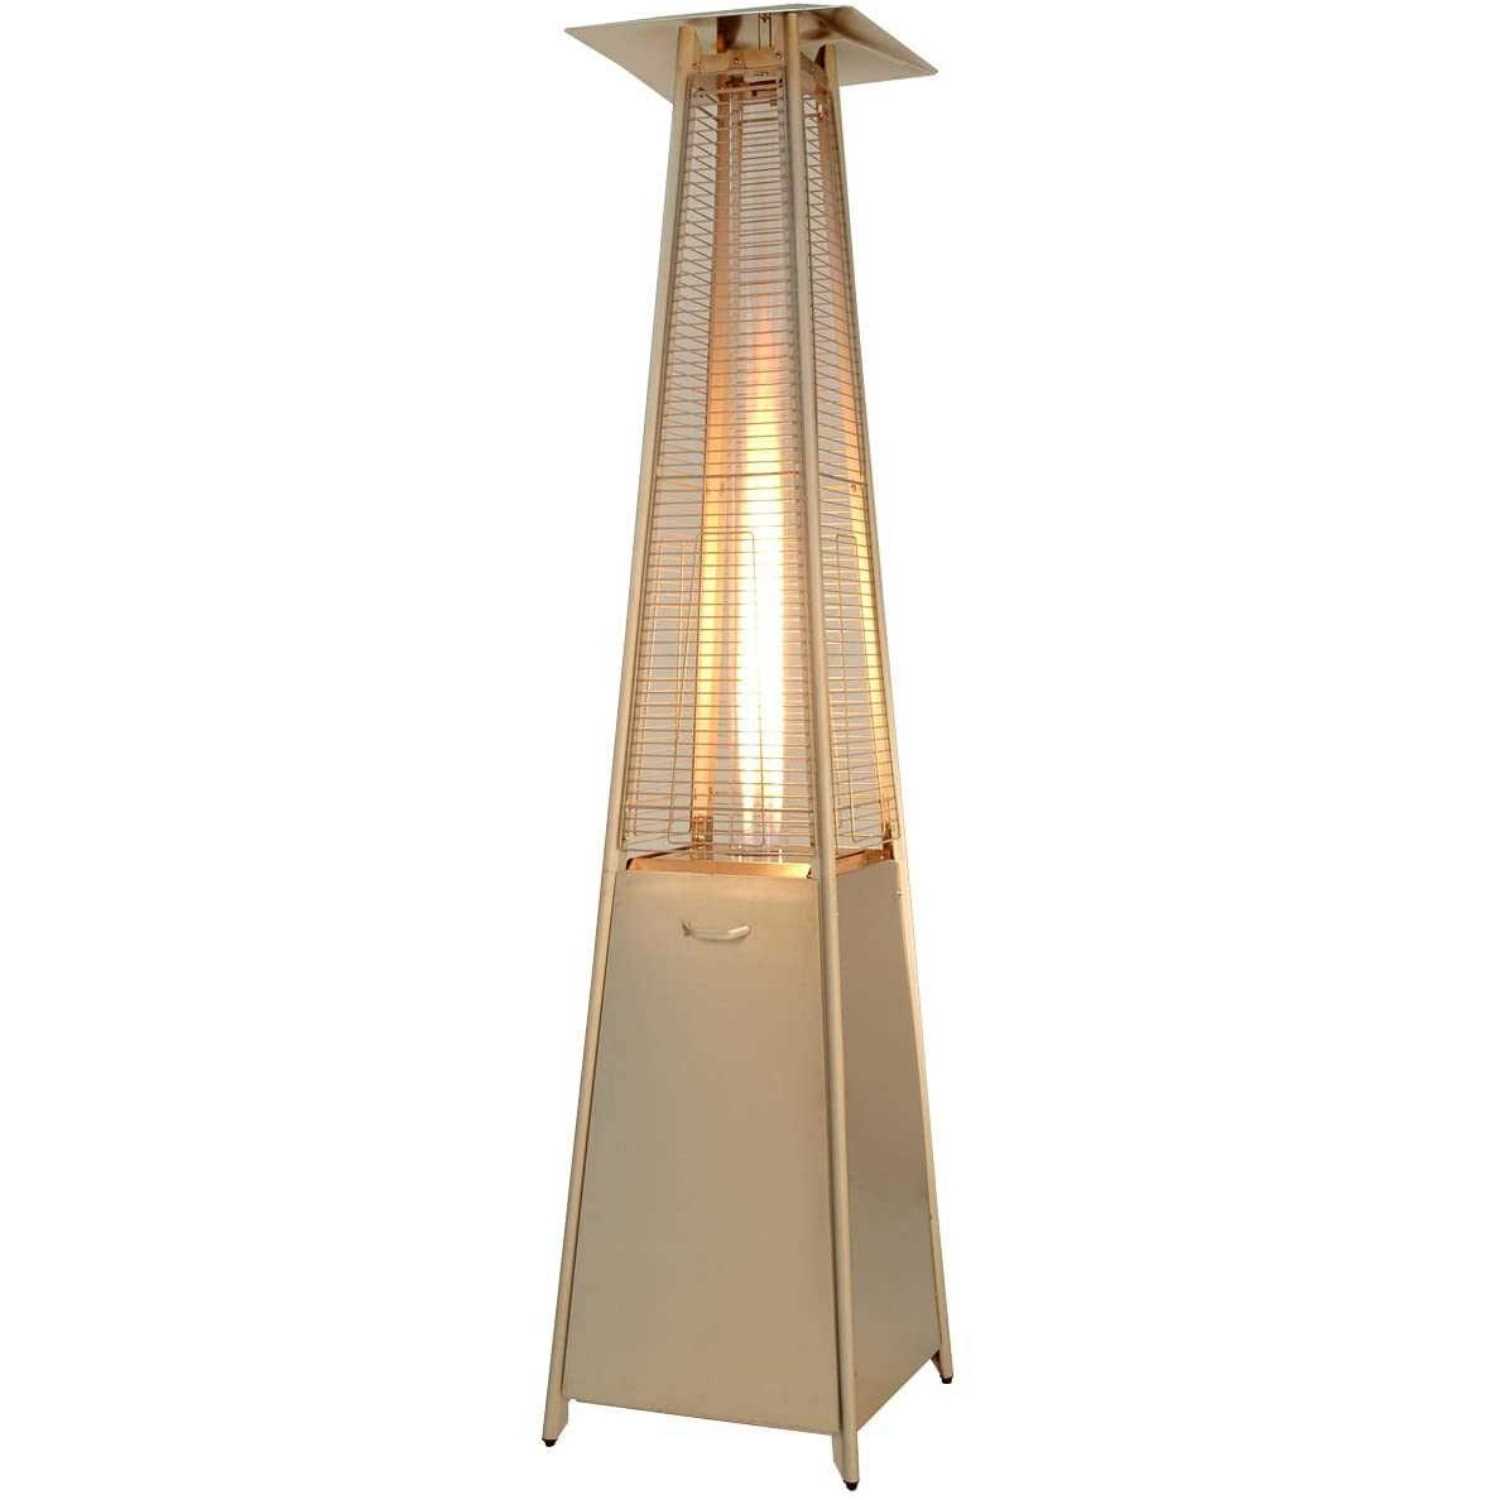 91-Inch Tall Dancing Flames Tower Patio Heater Lit Up – High End Christmas Gift For Husband